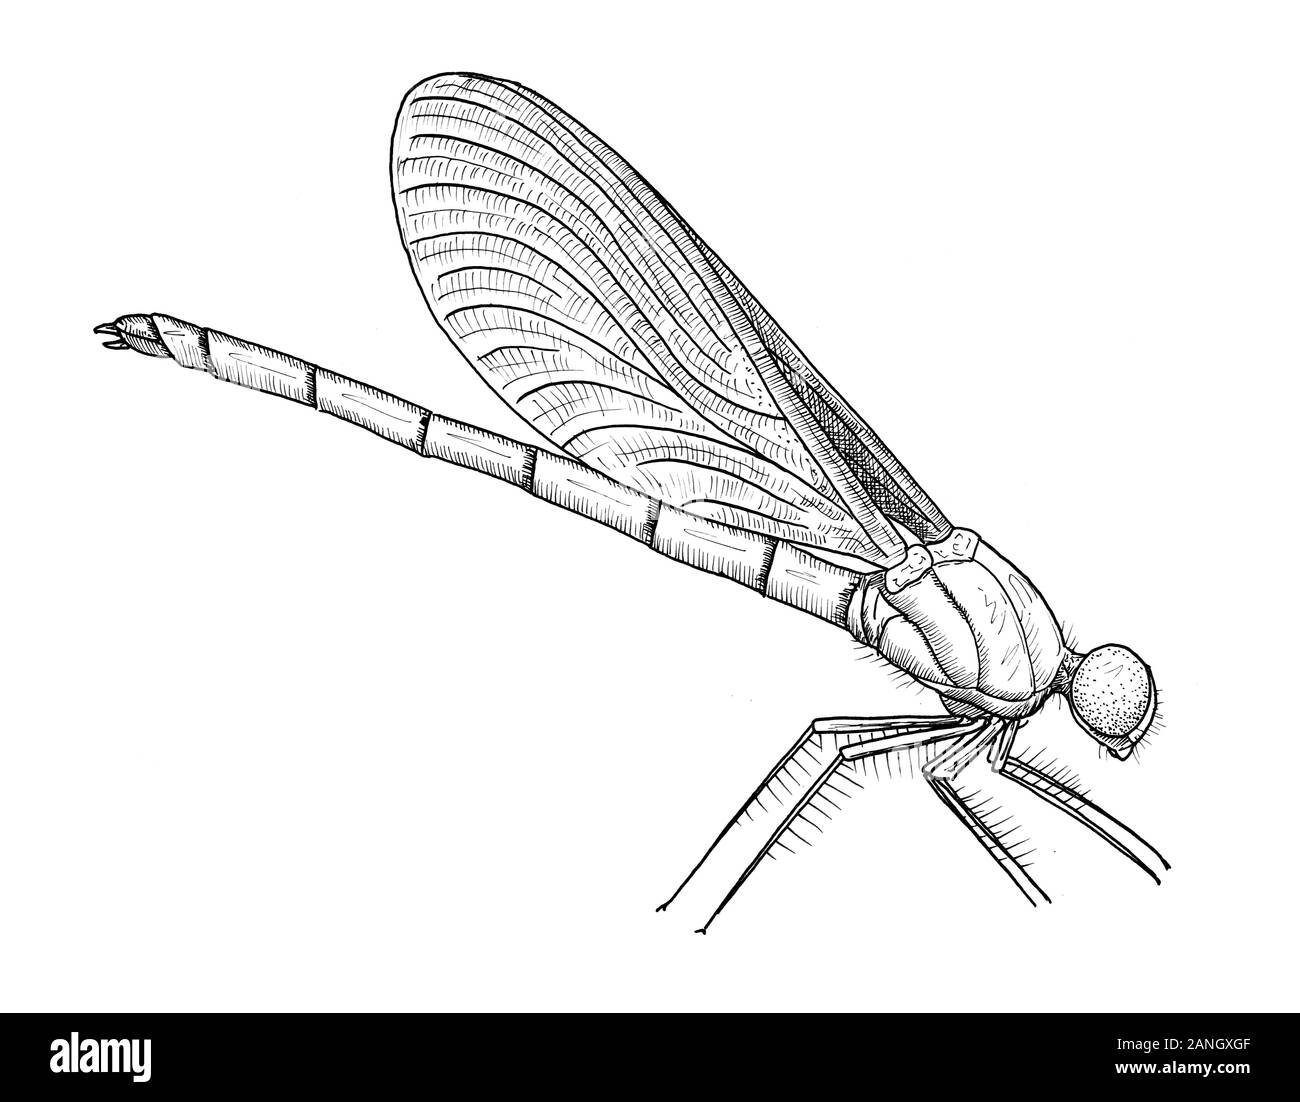 Drawing of dragonfly. Sketch of adult male Calopteryx splendens insect, black and white illustration Stock Photo